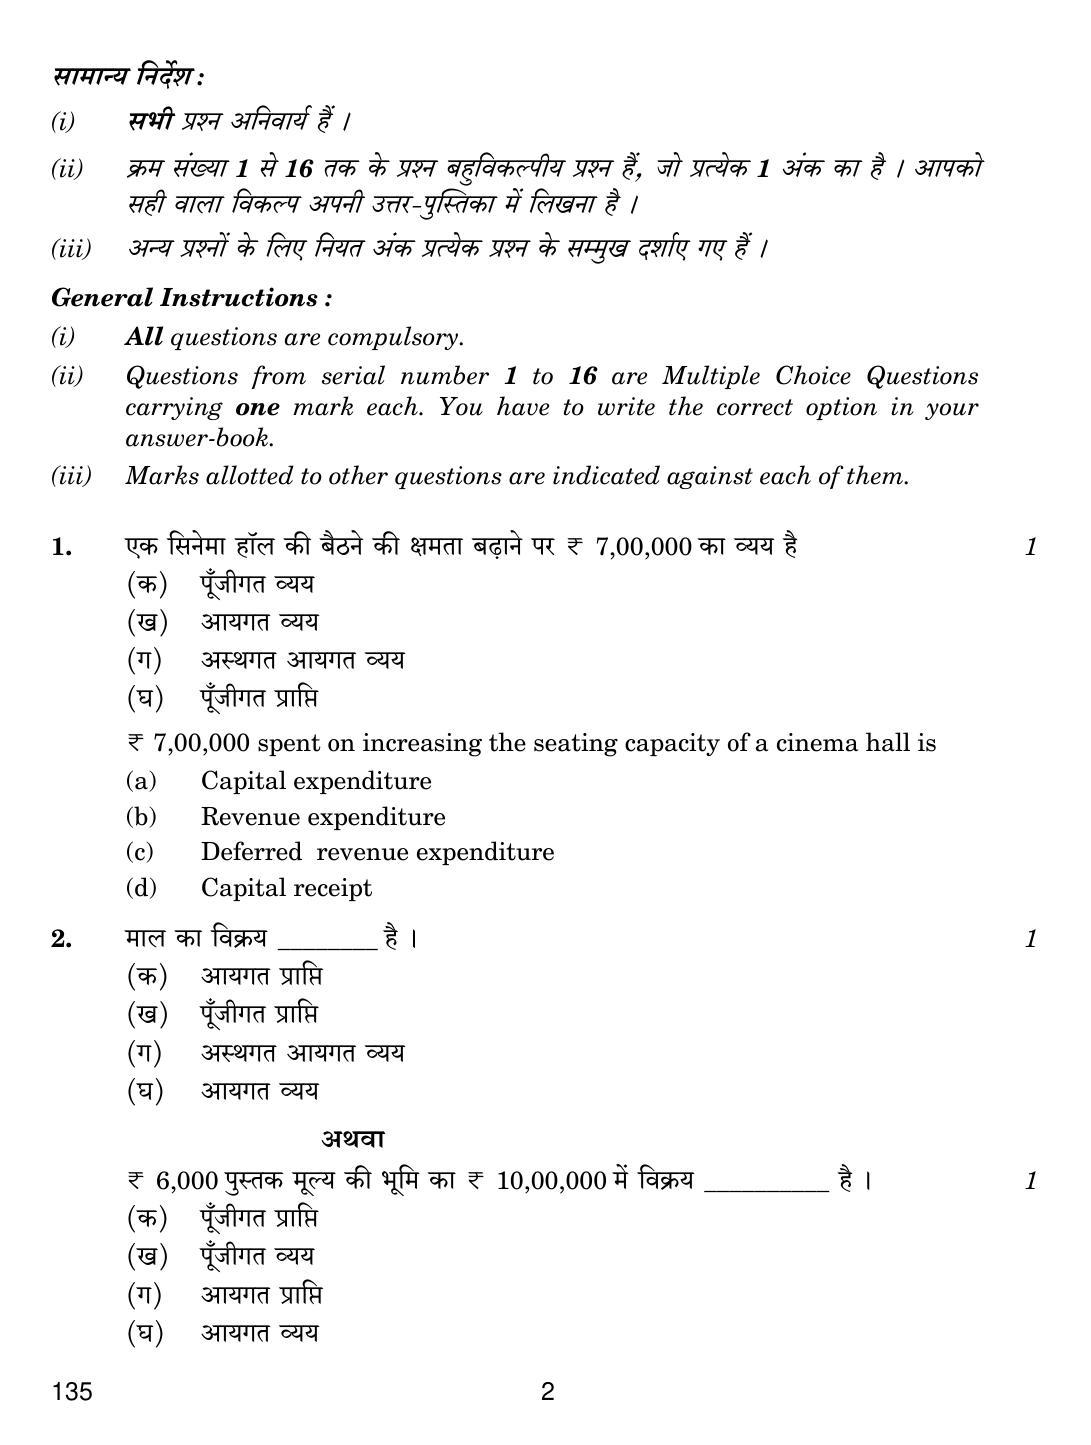 CBSE Class 10 135 ELEMENTS OF BOOK-KEEPING AND ACCOUNTANCY (COMMERCE) 2019 Question Paper - Page 2